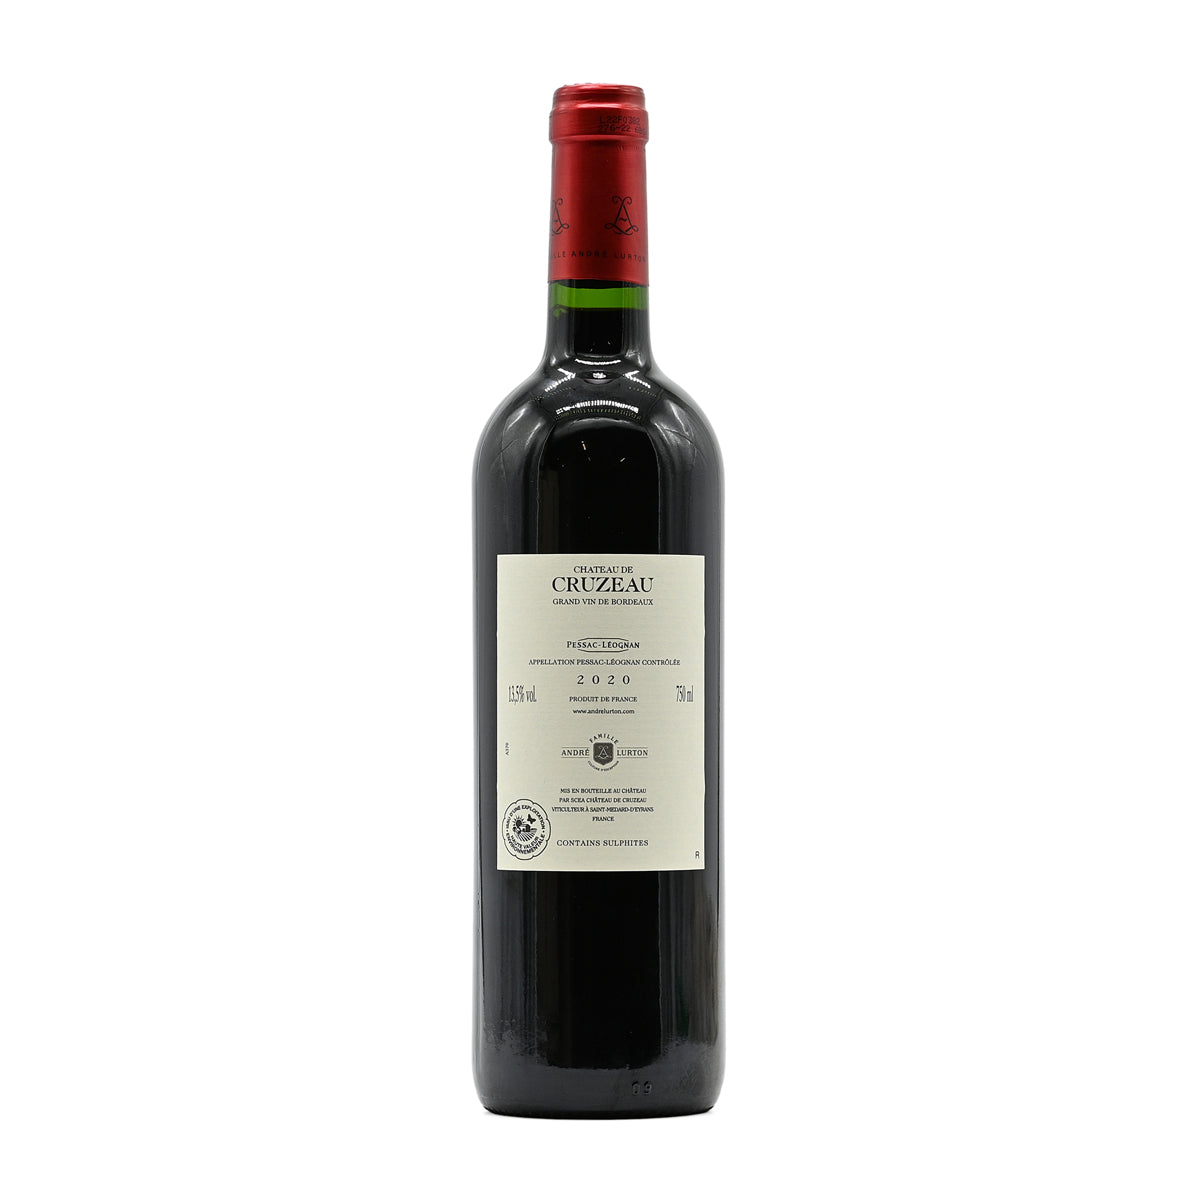 Chateau de Cruzeau 2020, 750ml French red wine, made from a blend of Cabernet Sauvignon, Cabernet Franc, and Merlot; from Pessac-Leognan, Bordeaux, France – GDV Fine Wines, Hong Kong